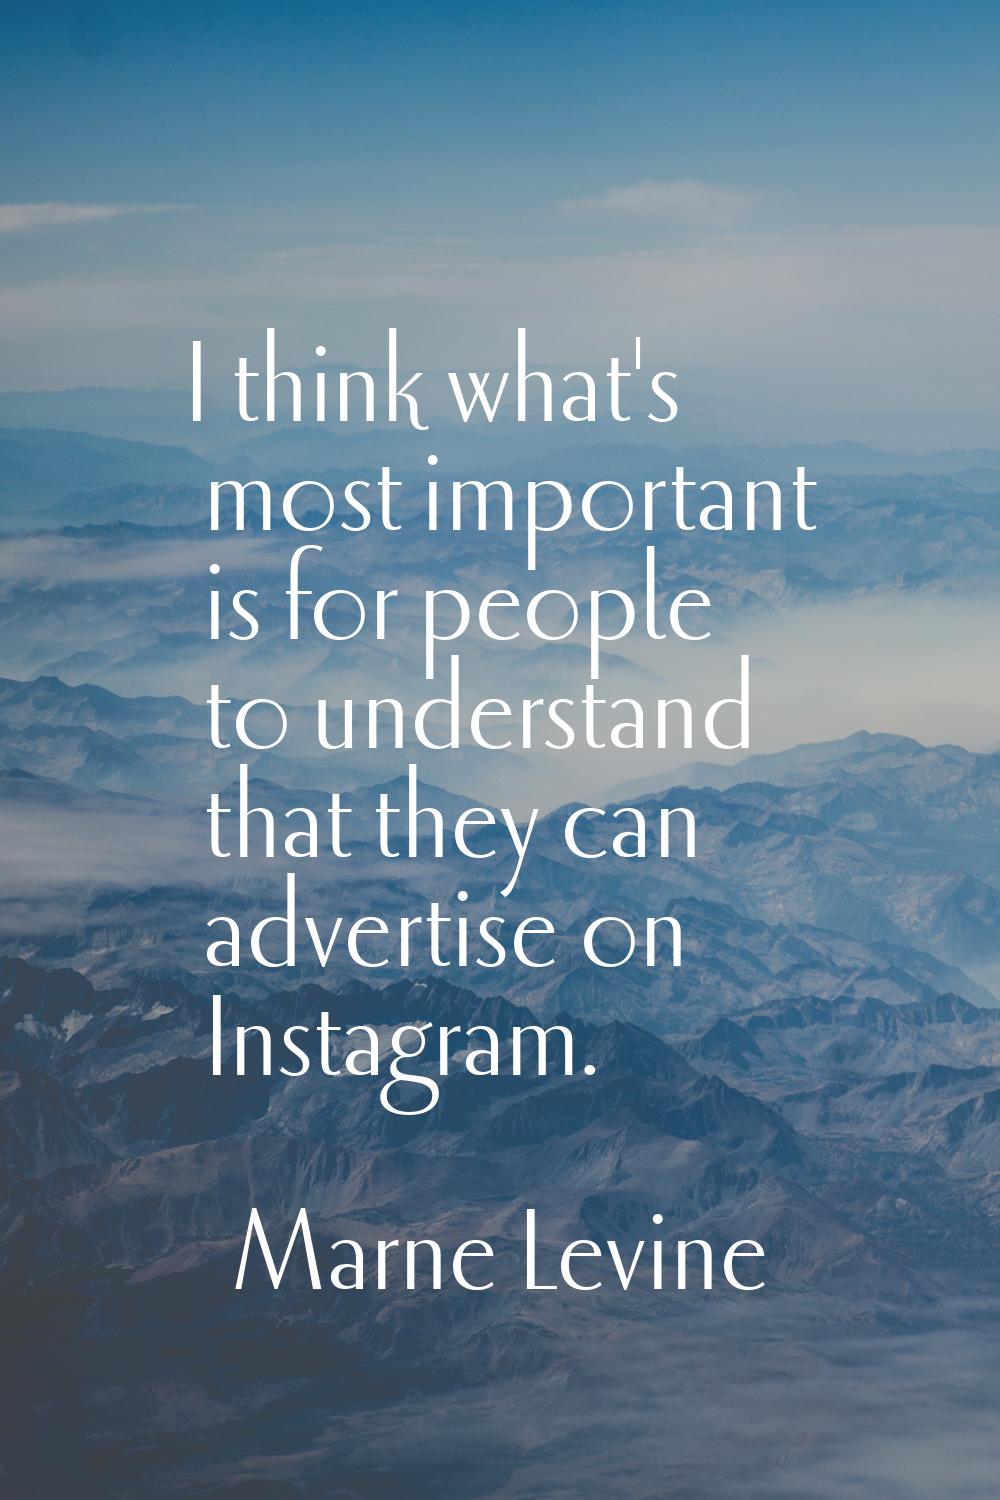 I think what's most important is for people to understand that they can advertise on Instagram.